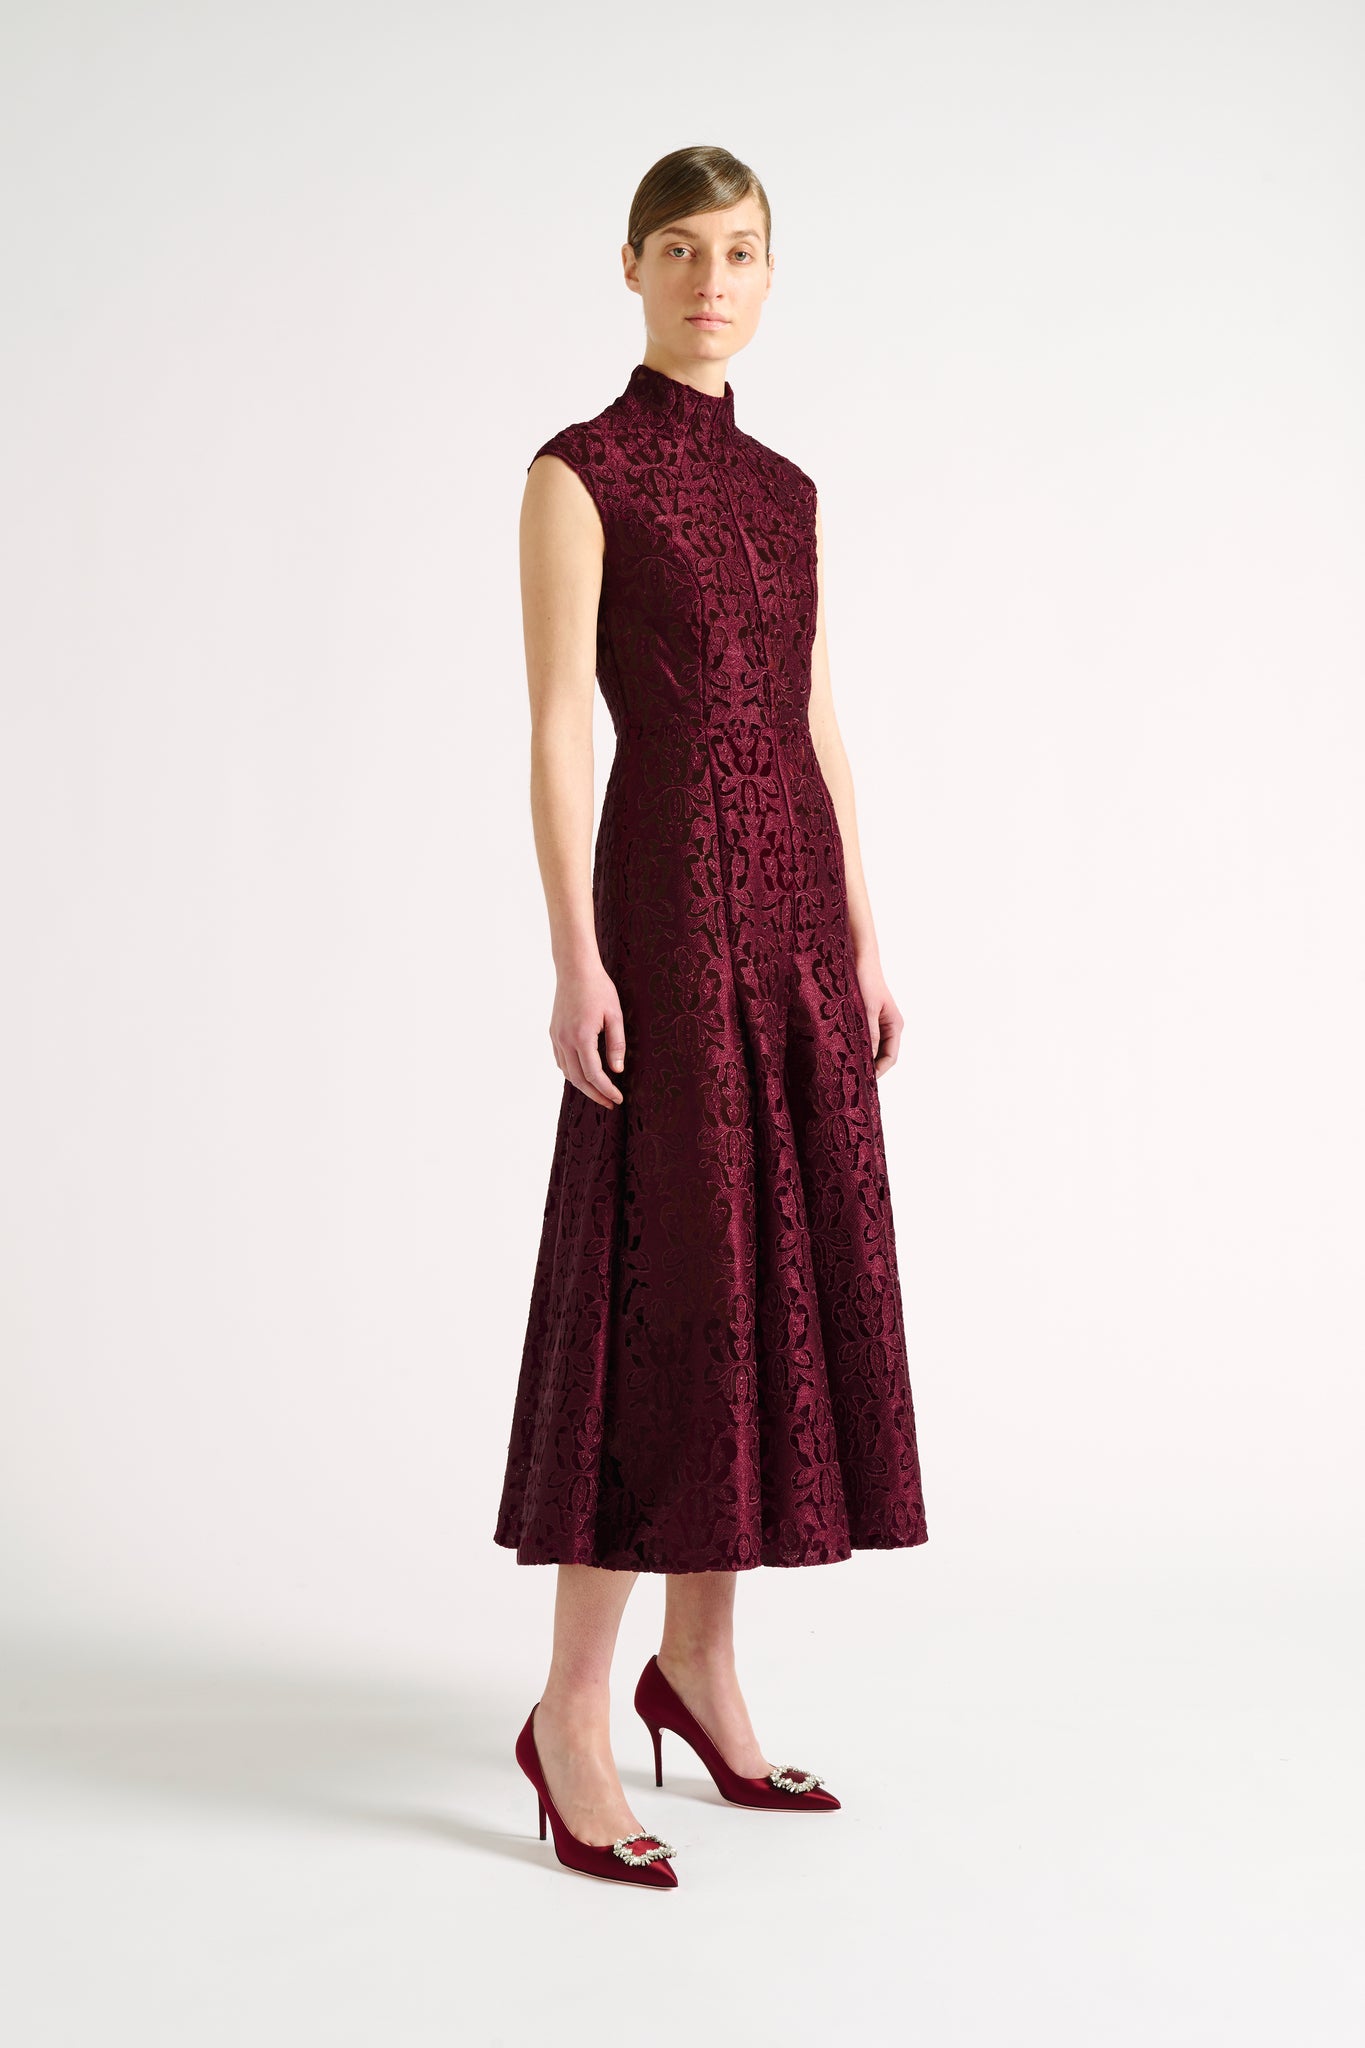 Charly Dress | Burgundy Lace High Neck Fit and Flare Dress | Emilia Wickstead